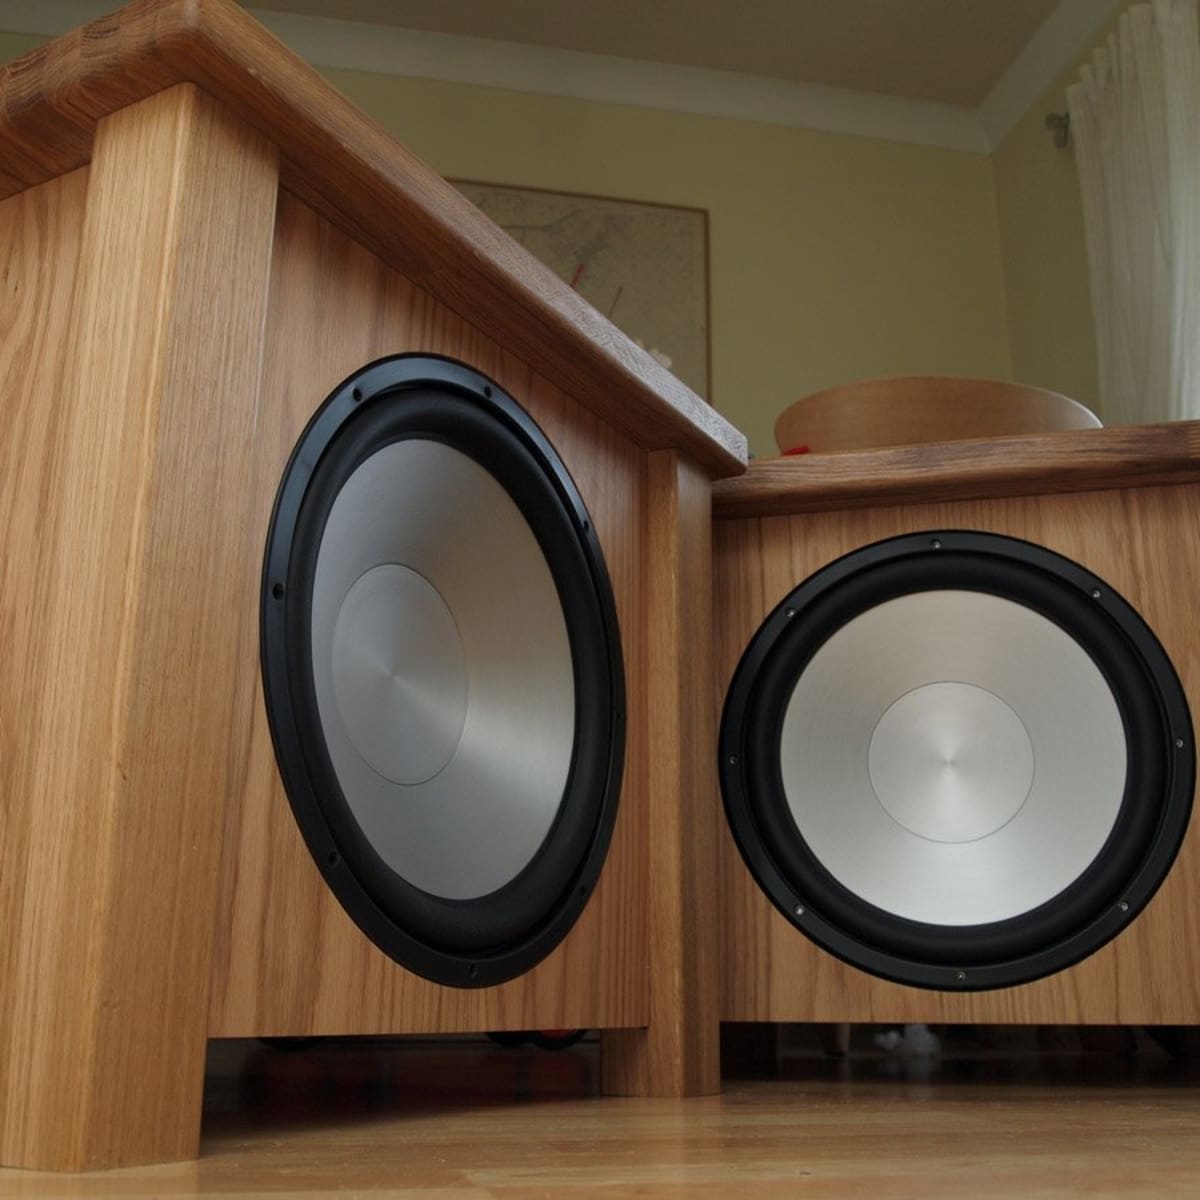 How to Design Your Own DIY Subwoofer - TurboFuture